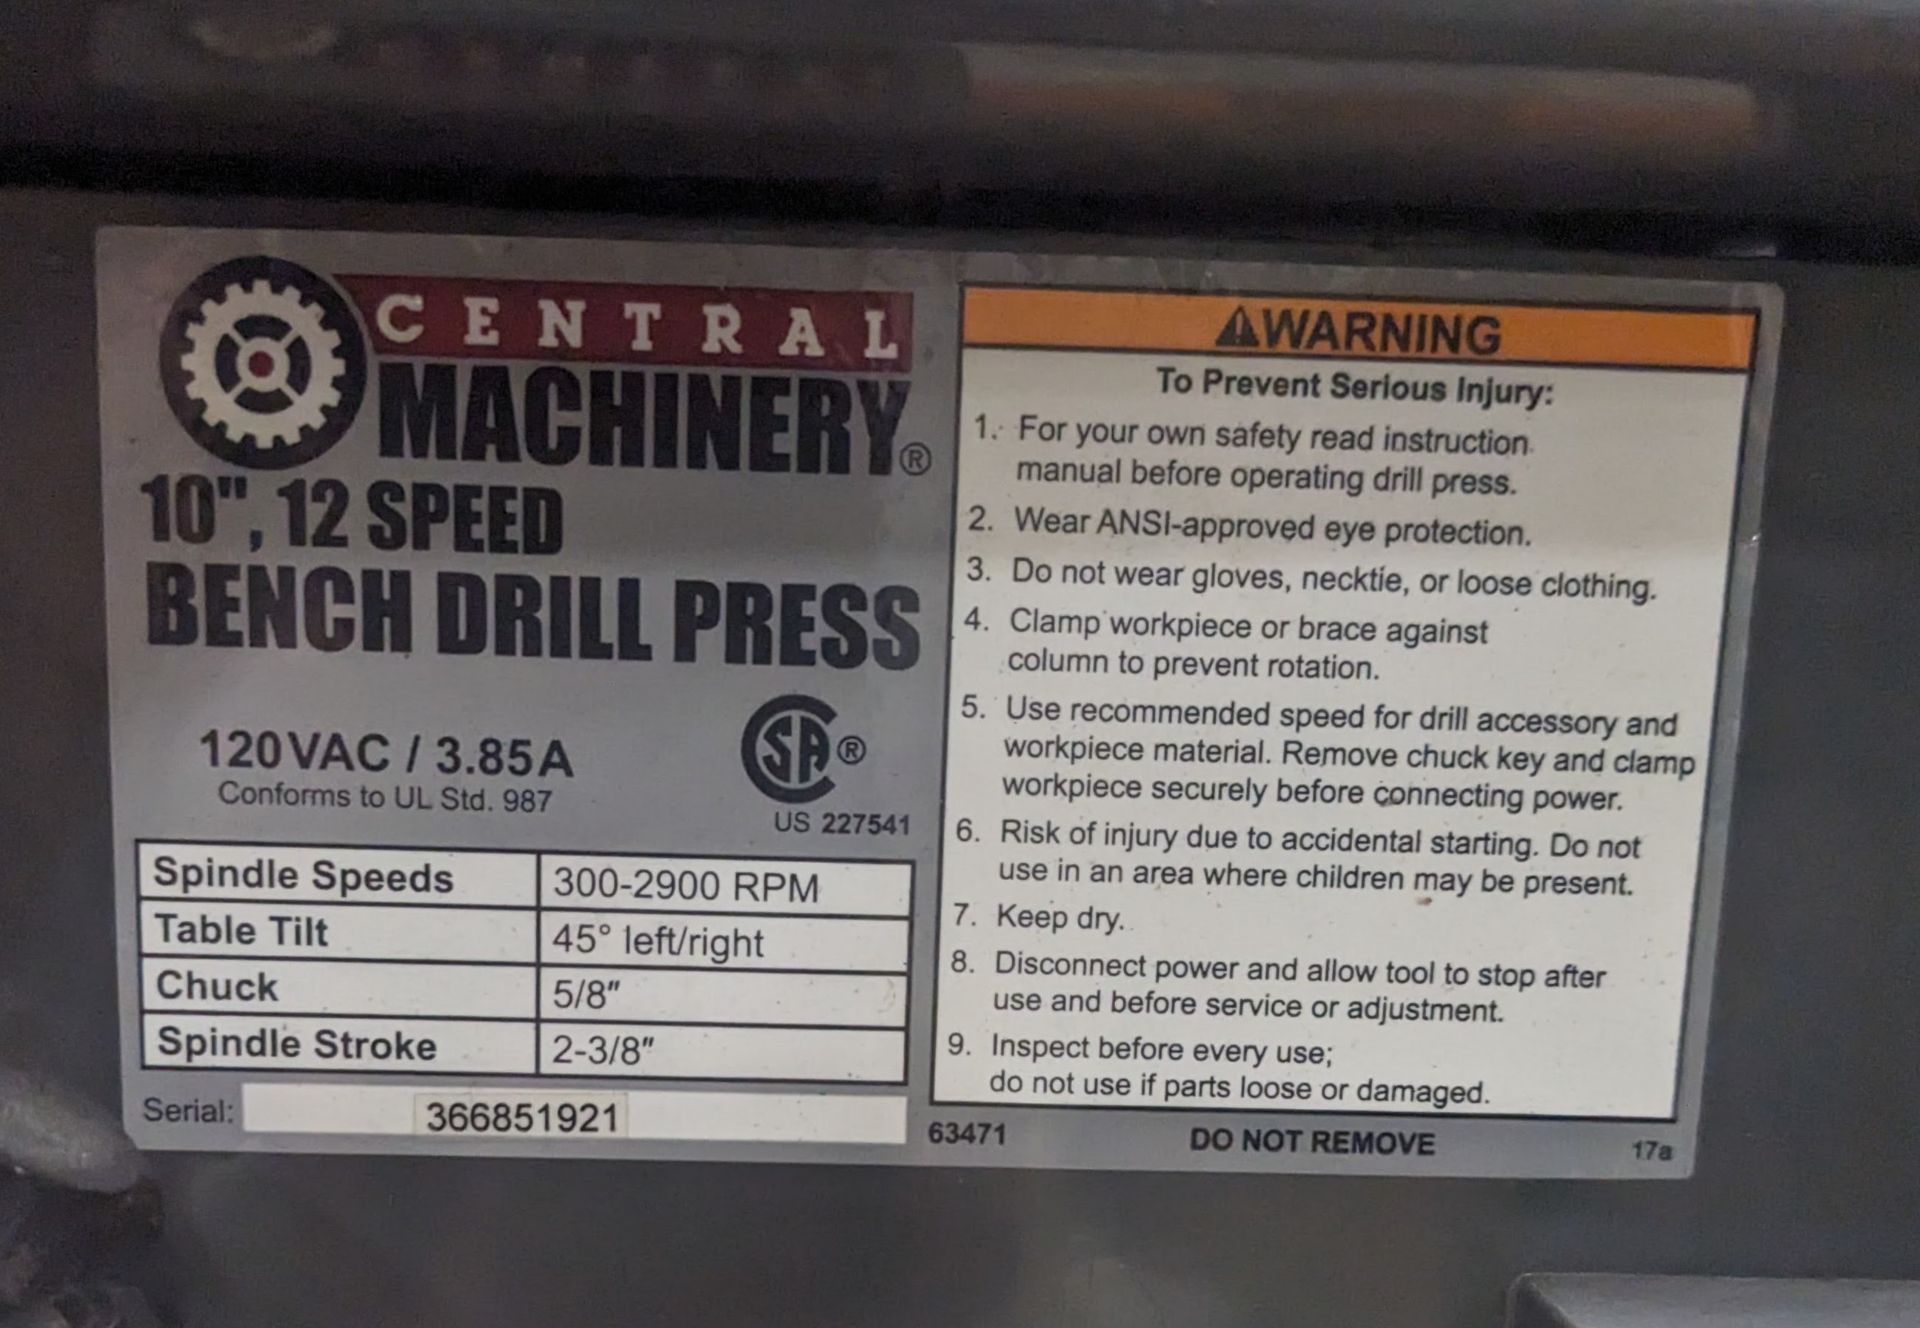 Central Machinery 10" 12-Speed Bench Drill Press - Image 2 of 2